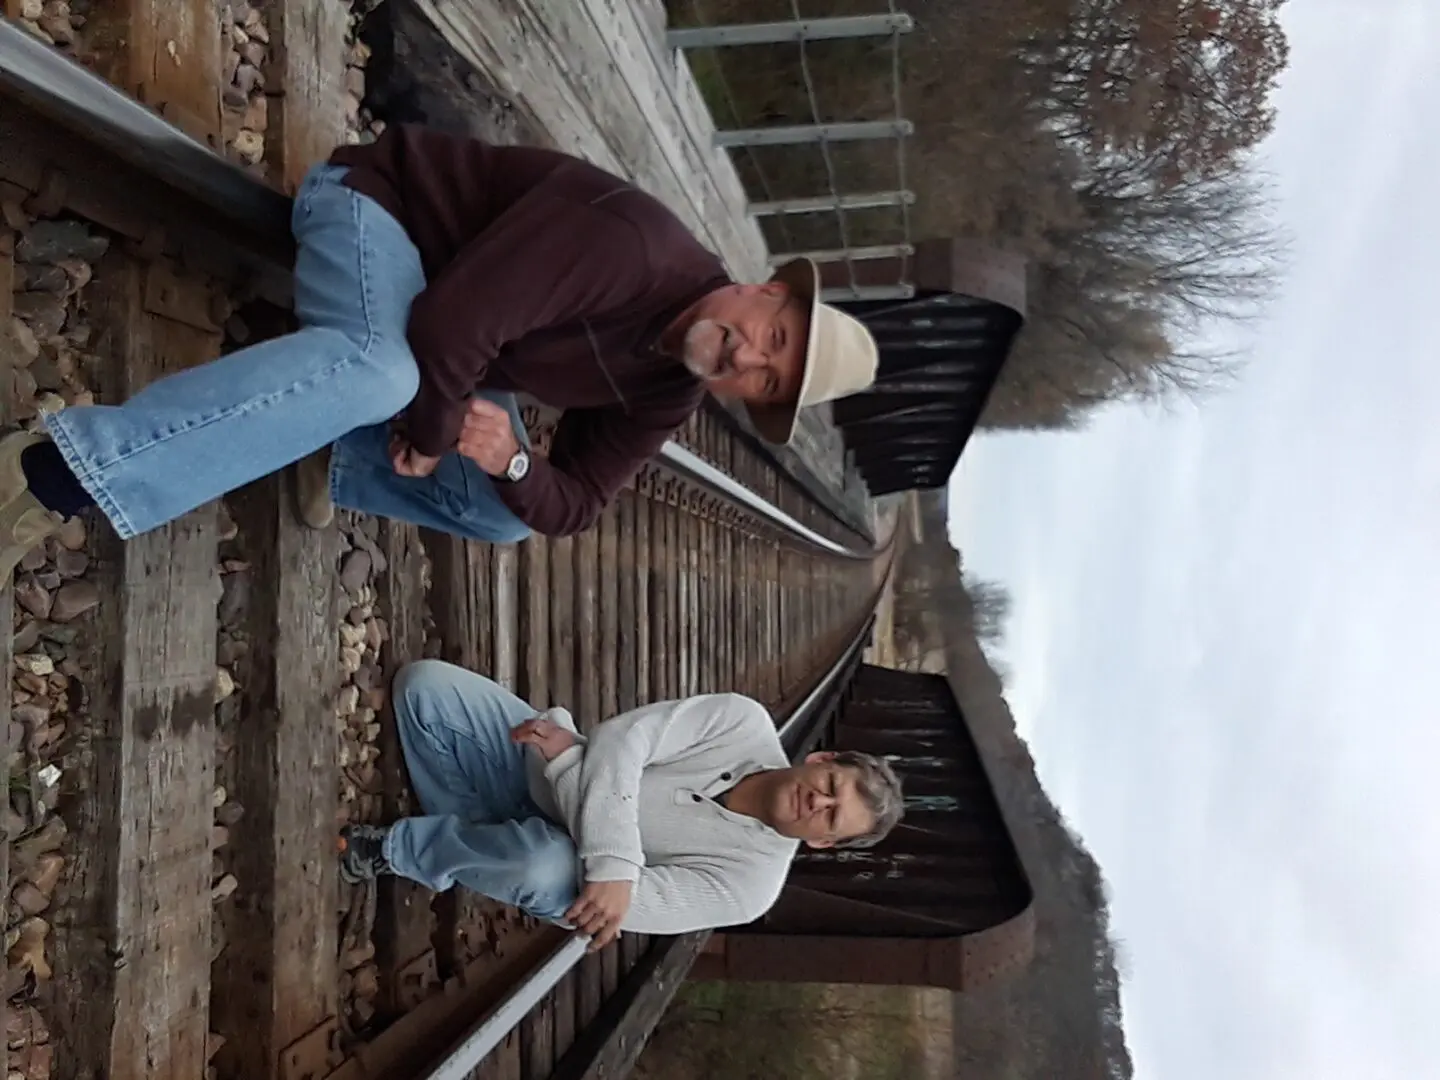 Two musician posing for a picture in railway track